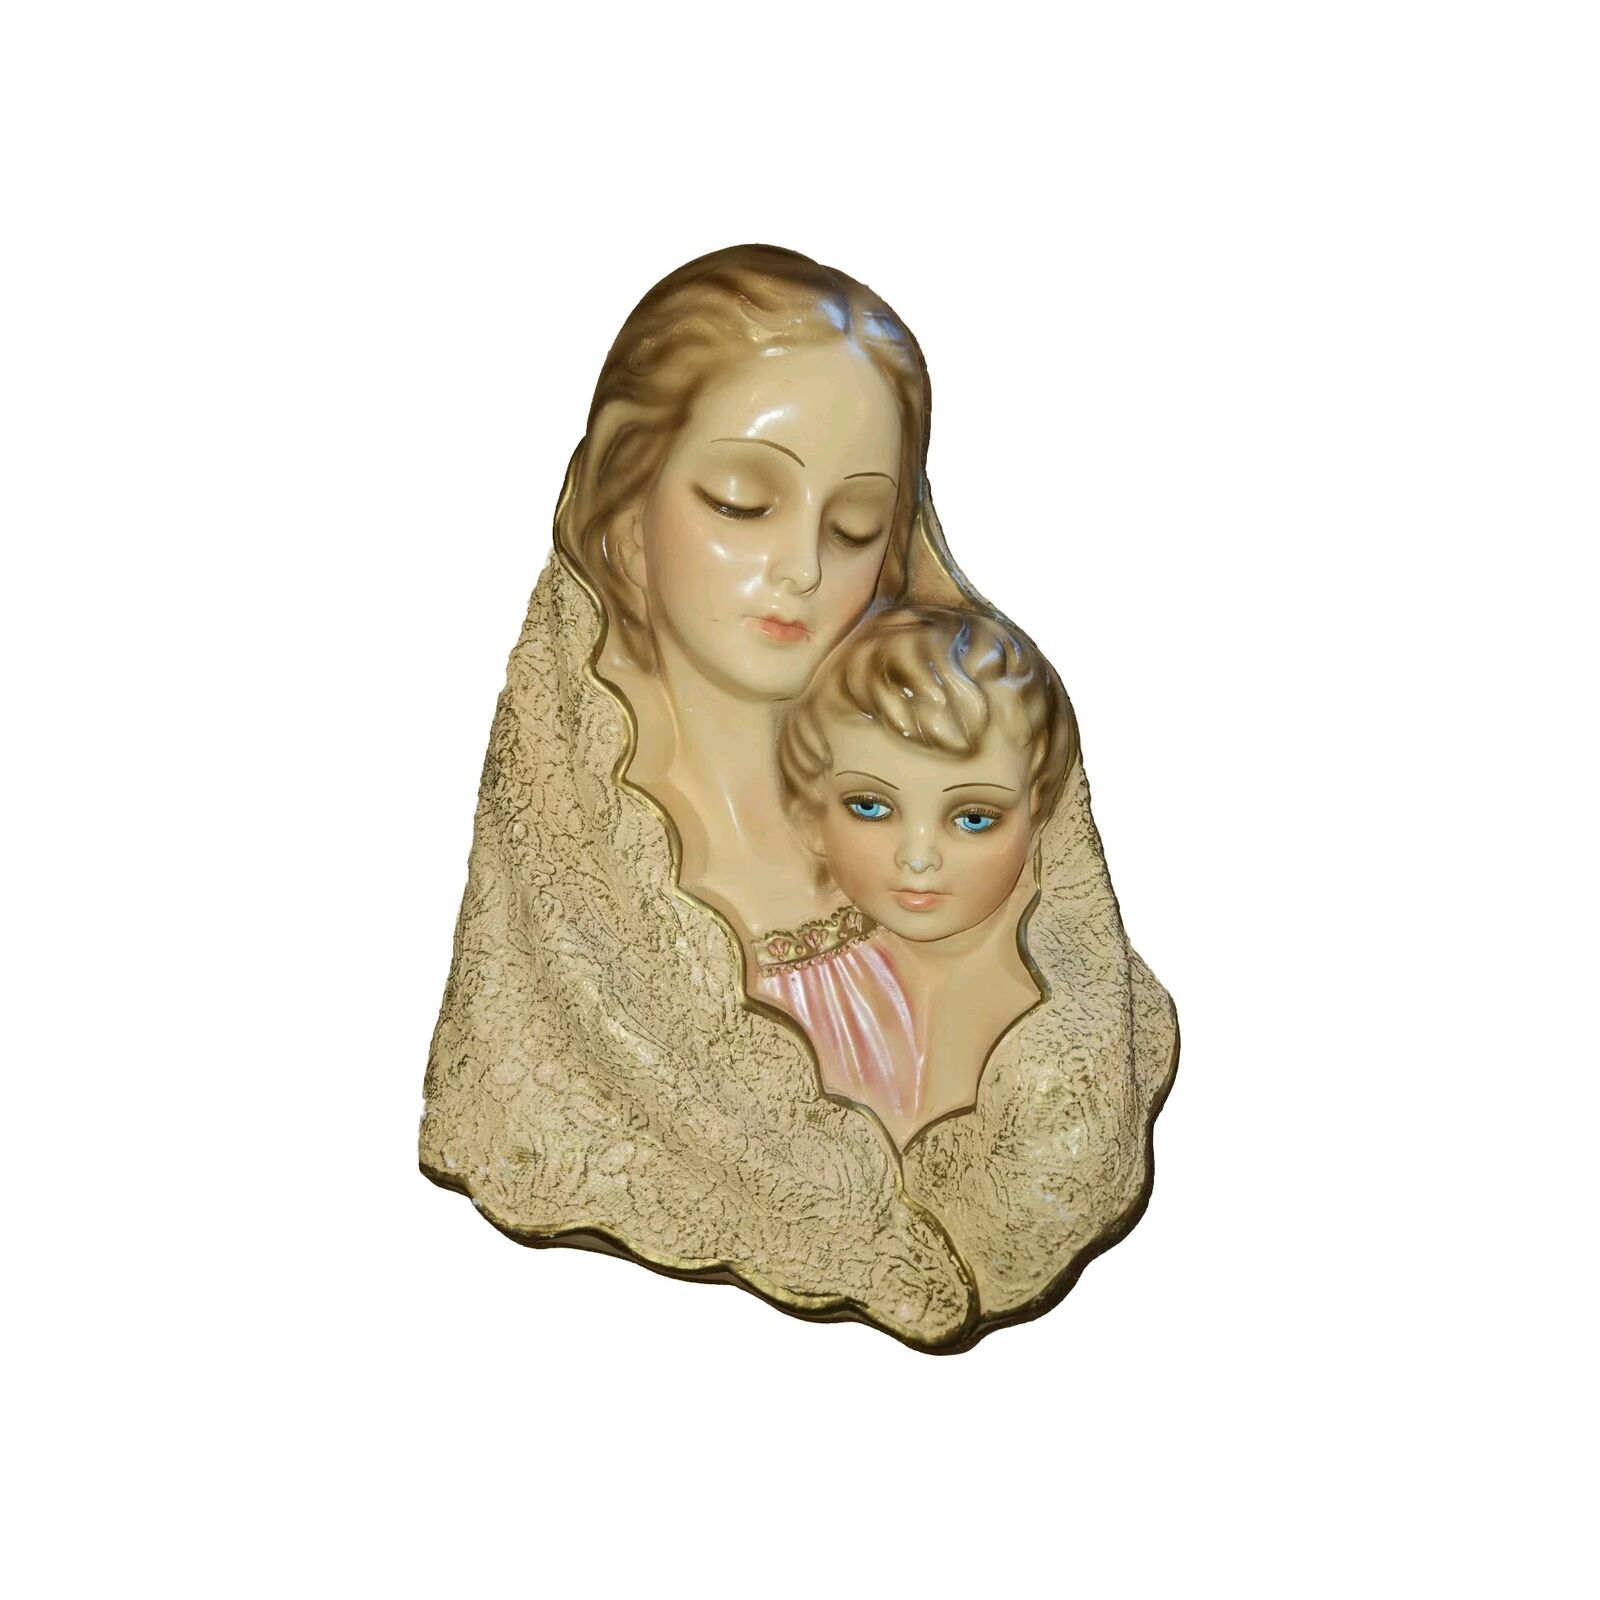 VINTAGE CHALKWARE PLAQUE WALL HANGING VIRGIN MARY BABY JESUS MADONNA & CHILD